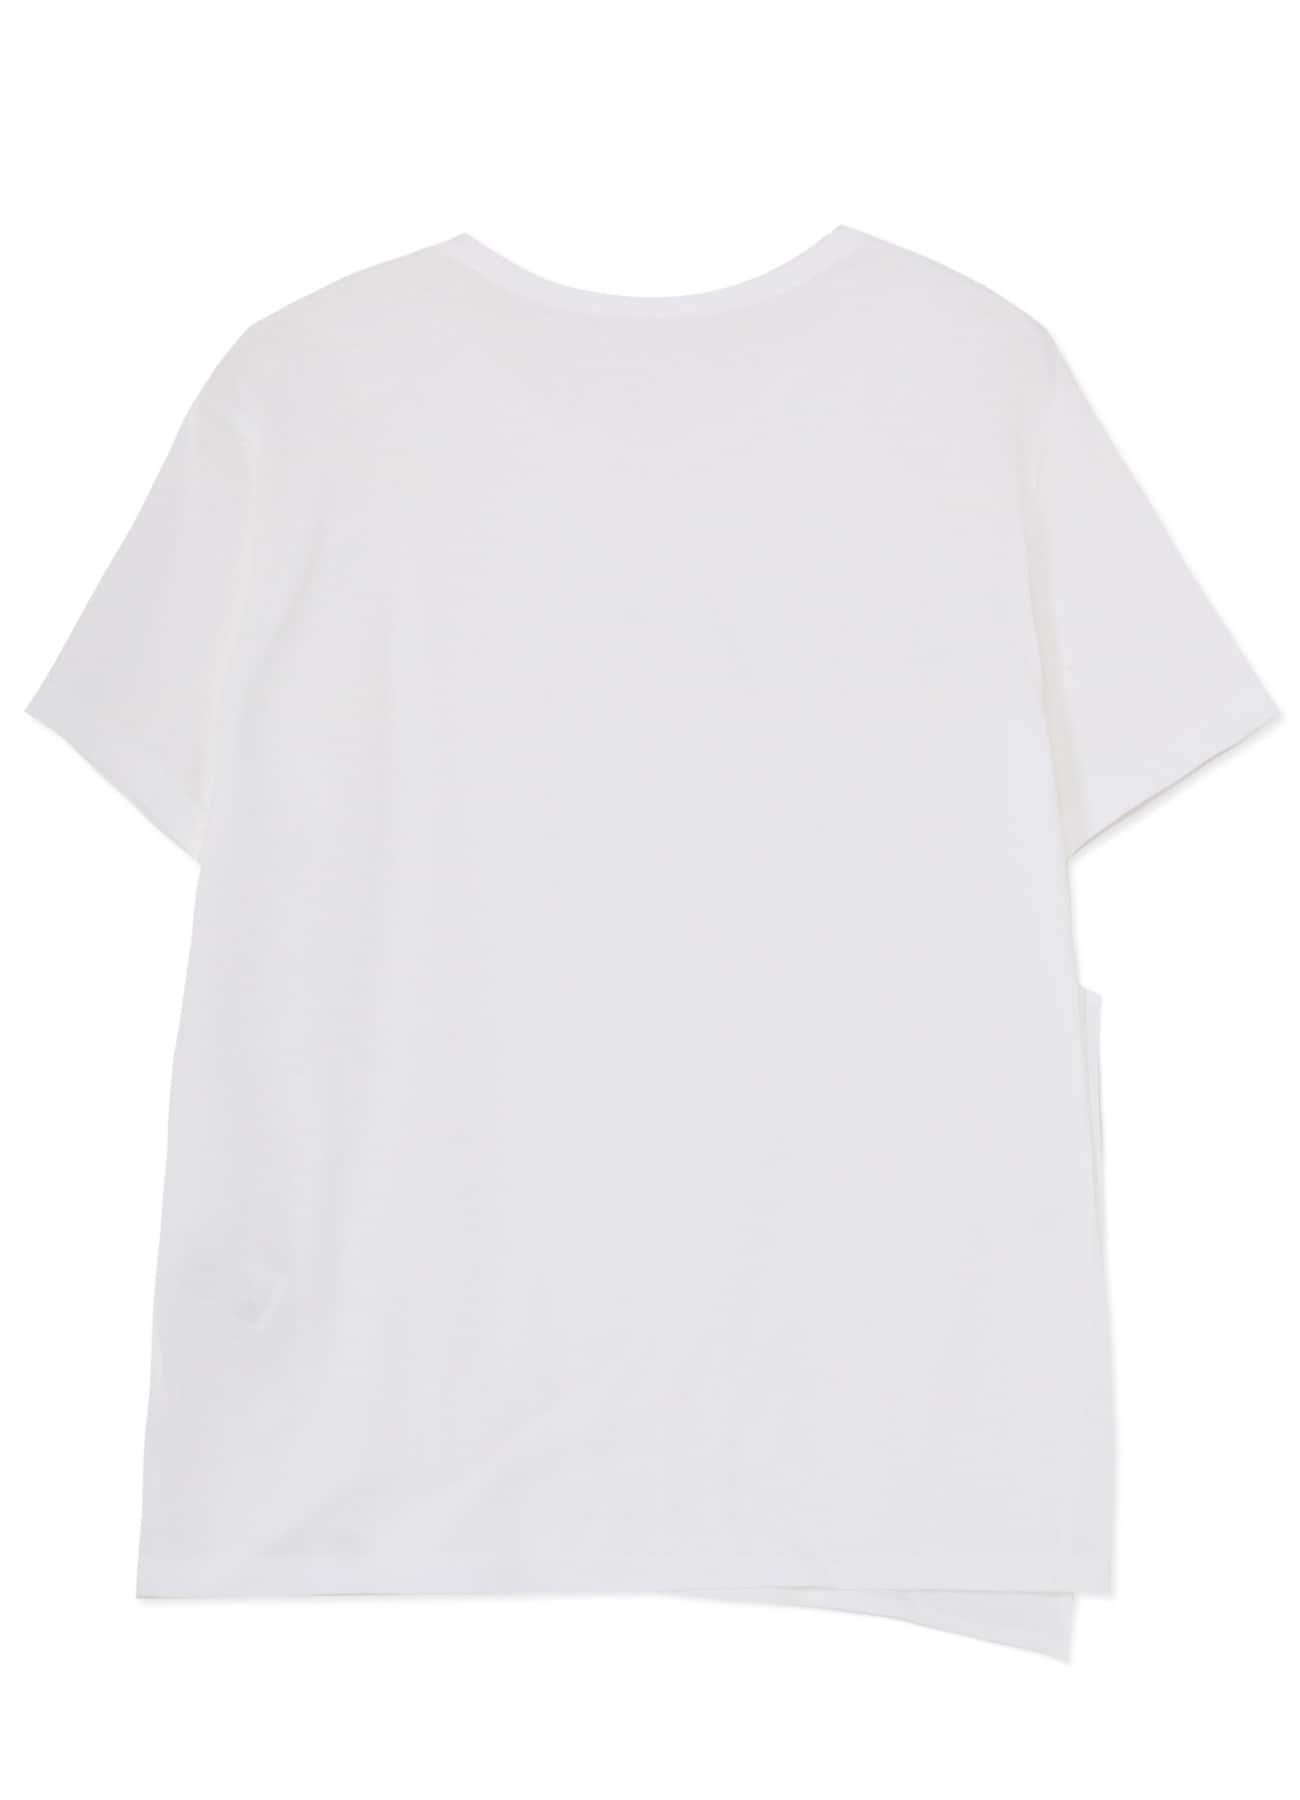 COTTON JERSEY DOUBLE FRONT HALF SLEEVE T(S Off White): Y's｜THE